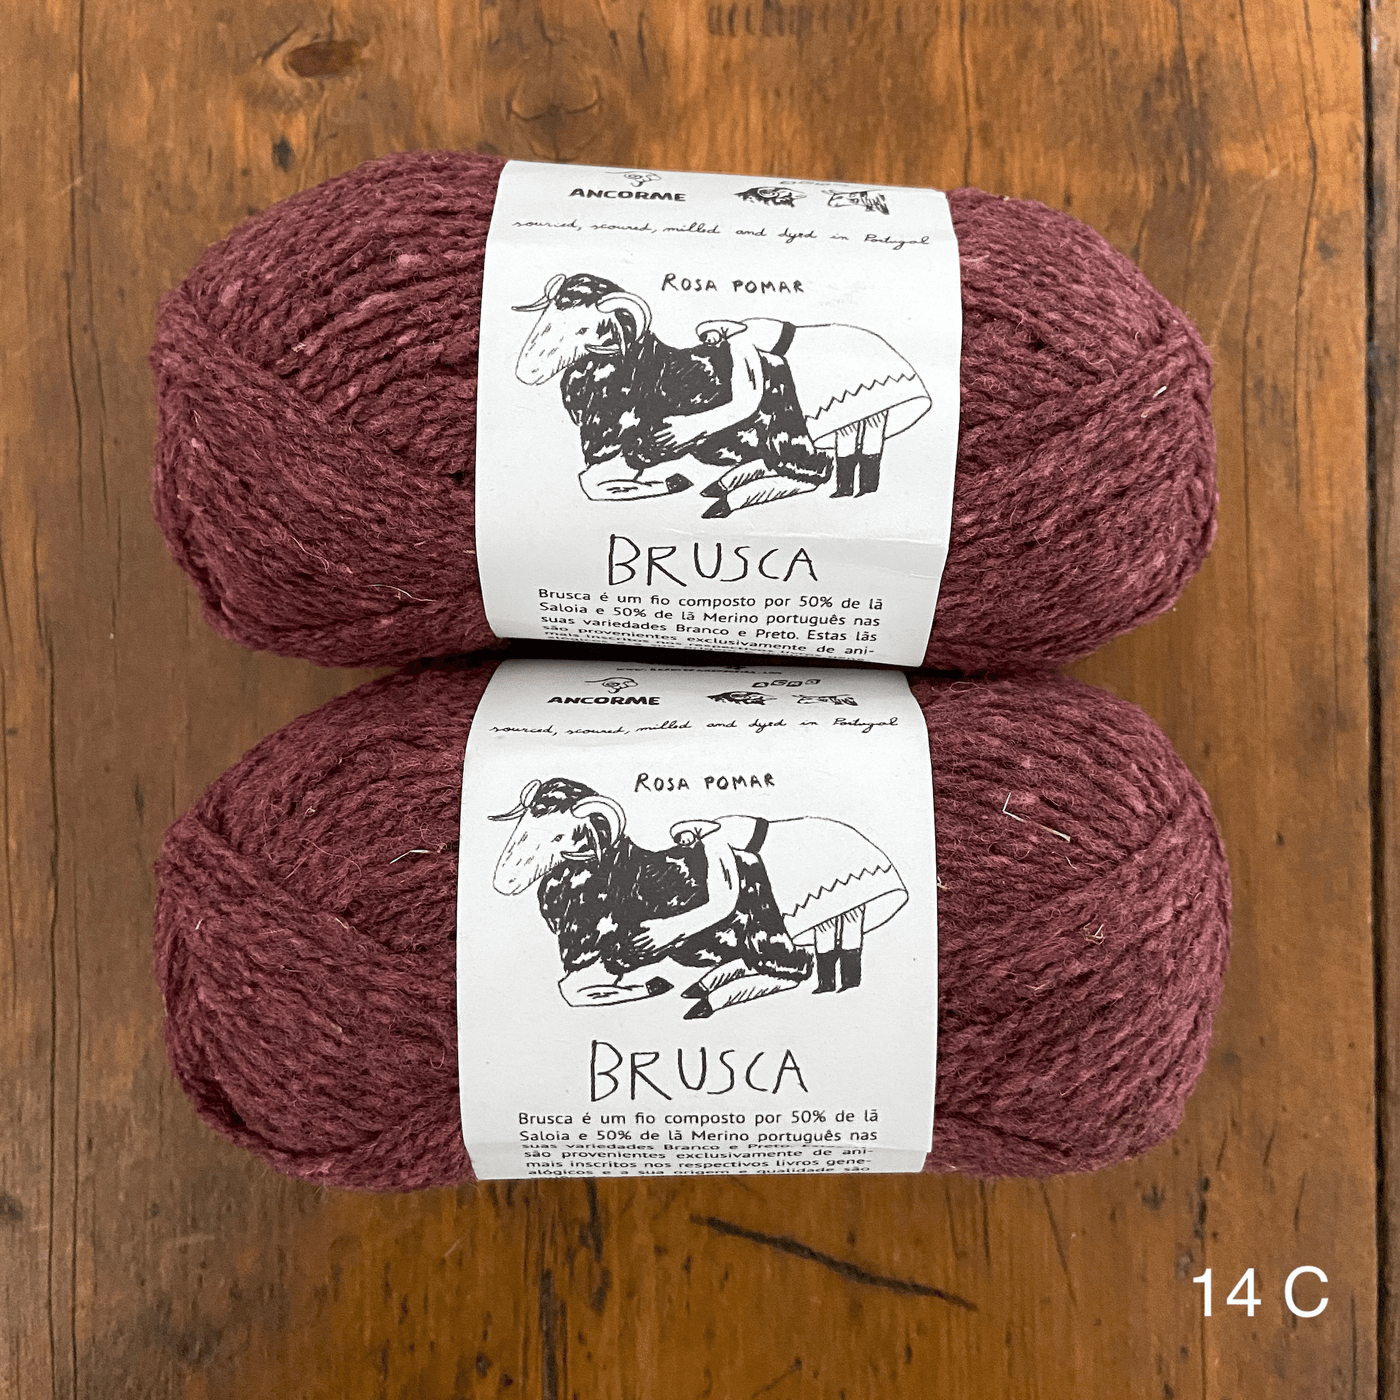 The Woolly Thistle Retrosaria Brusca DK Yarn in 14C (mauve)